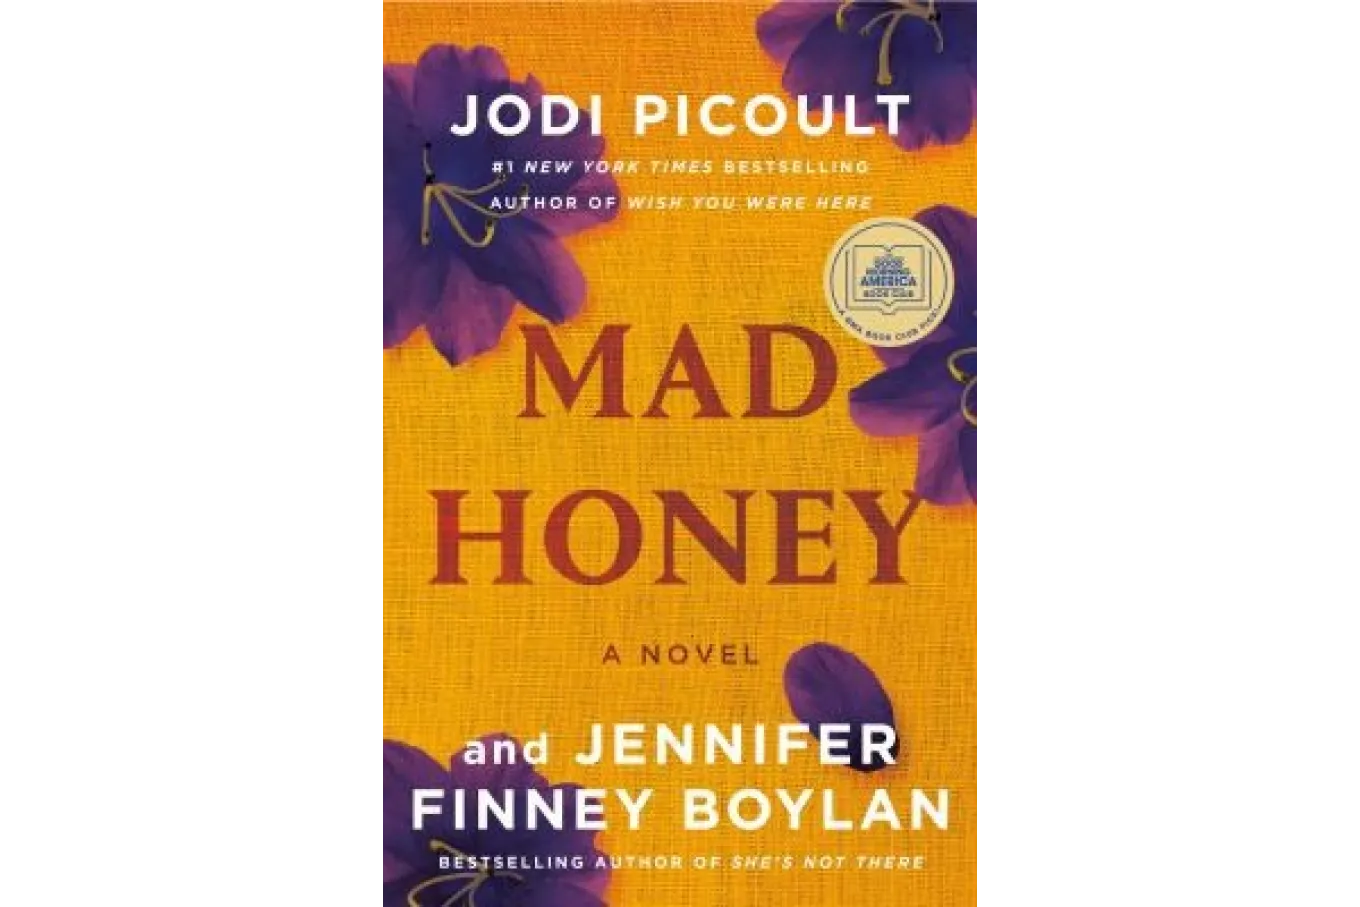 cover of Mad Honey by Jodi Picoult and Jennifer Finney Boylan. a mustard yellow cover with purple flowers and red and white lettering